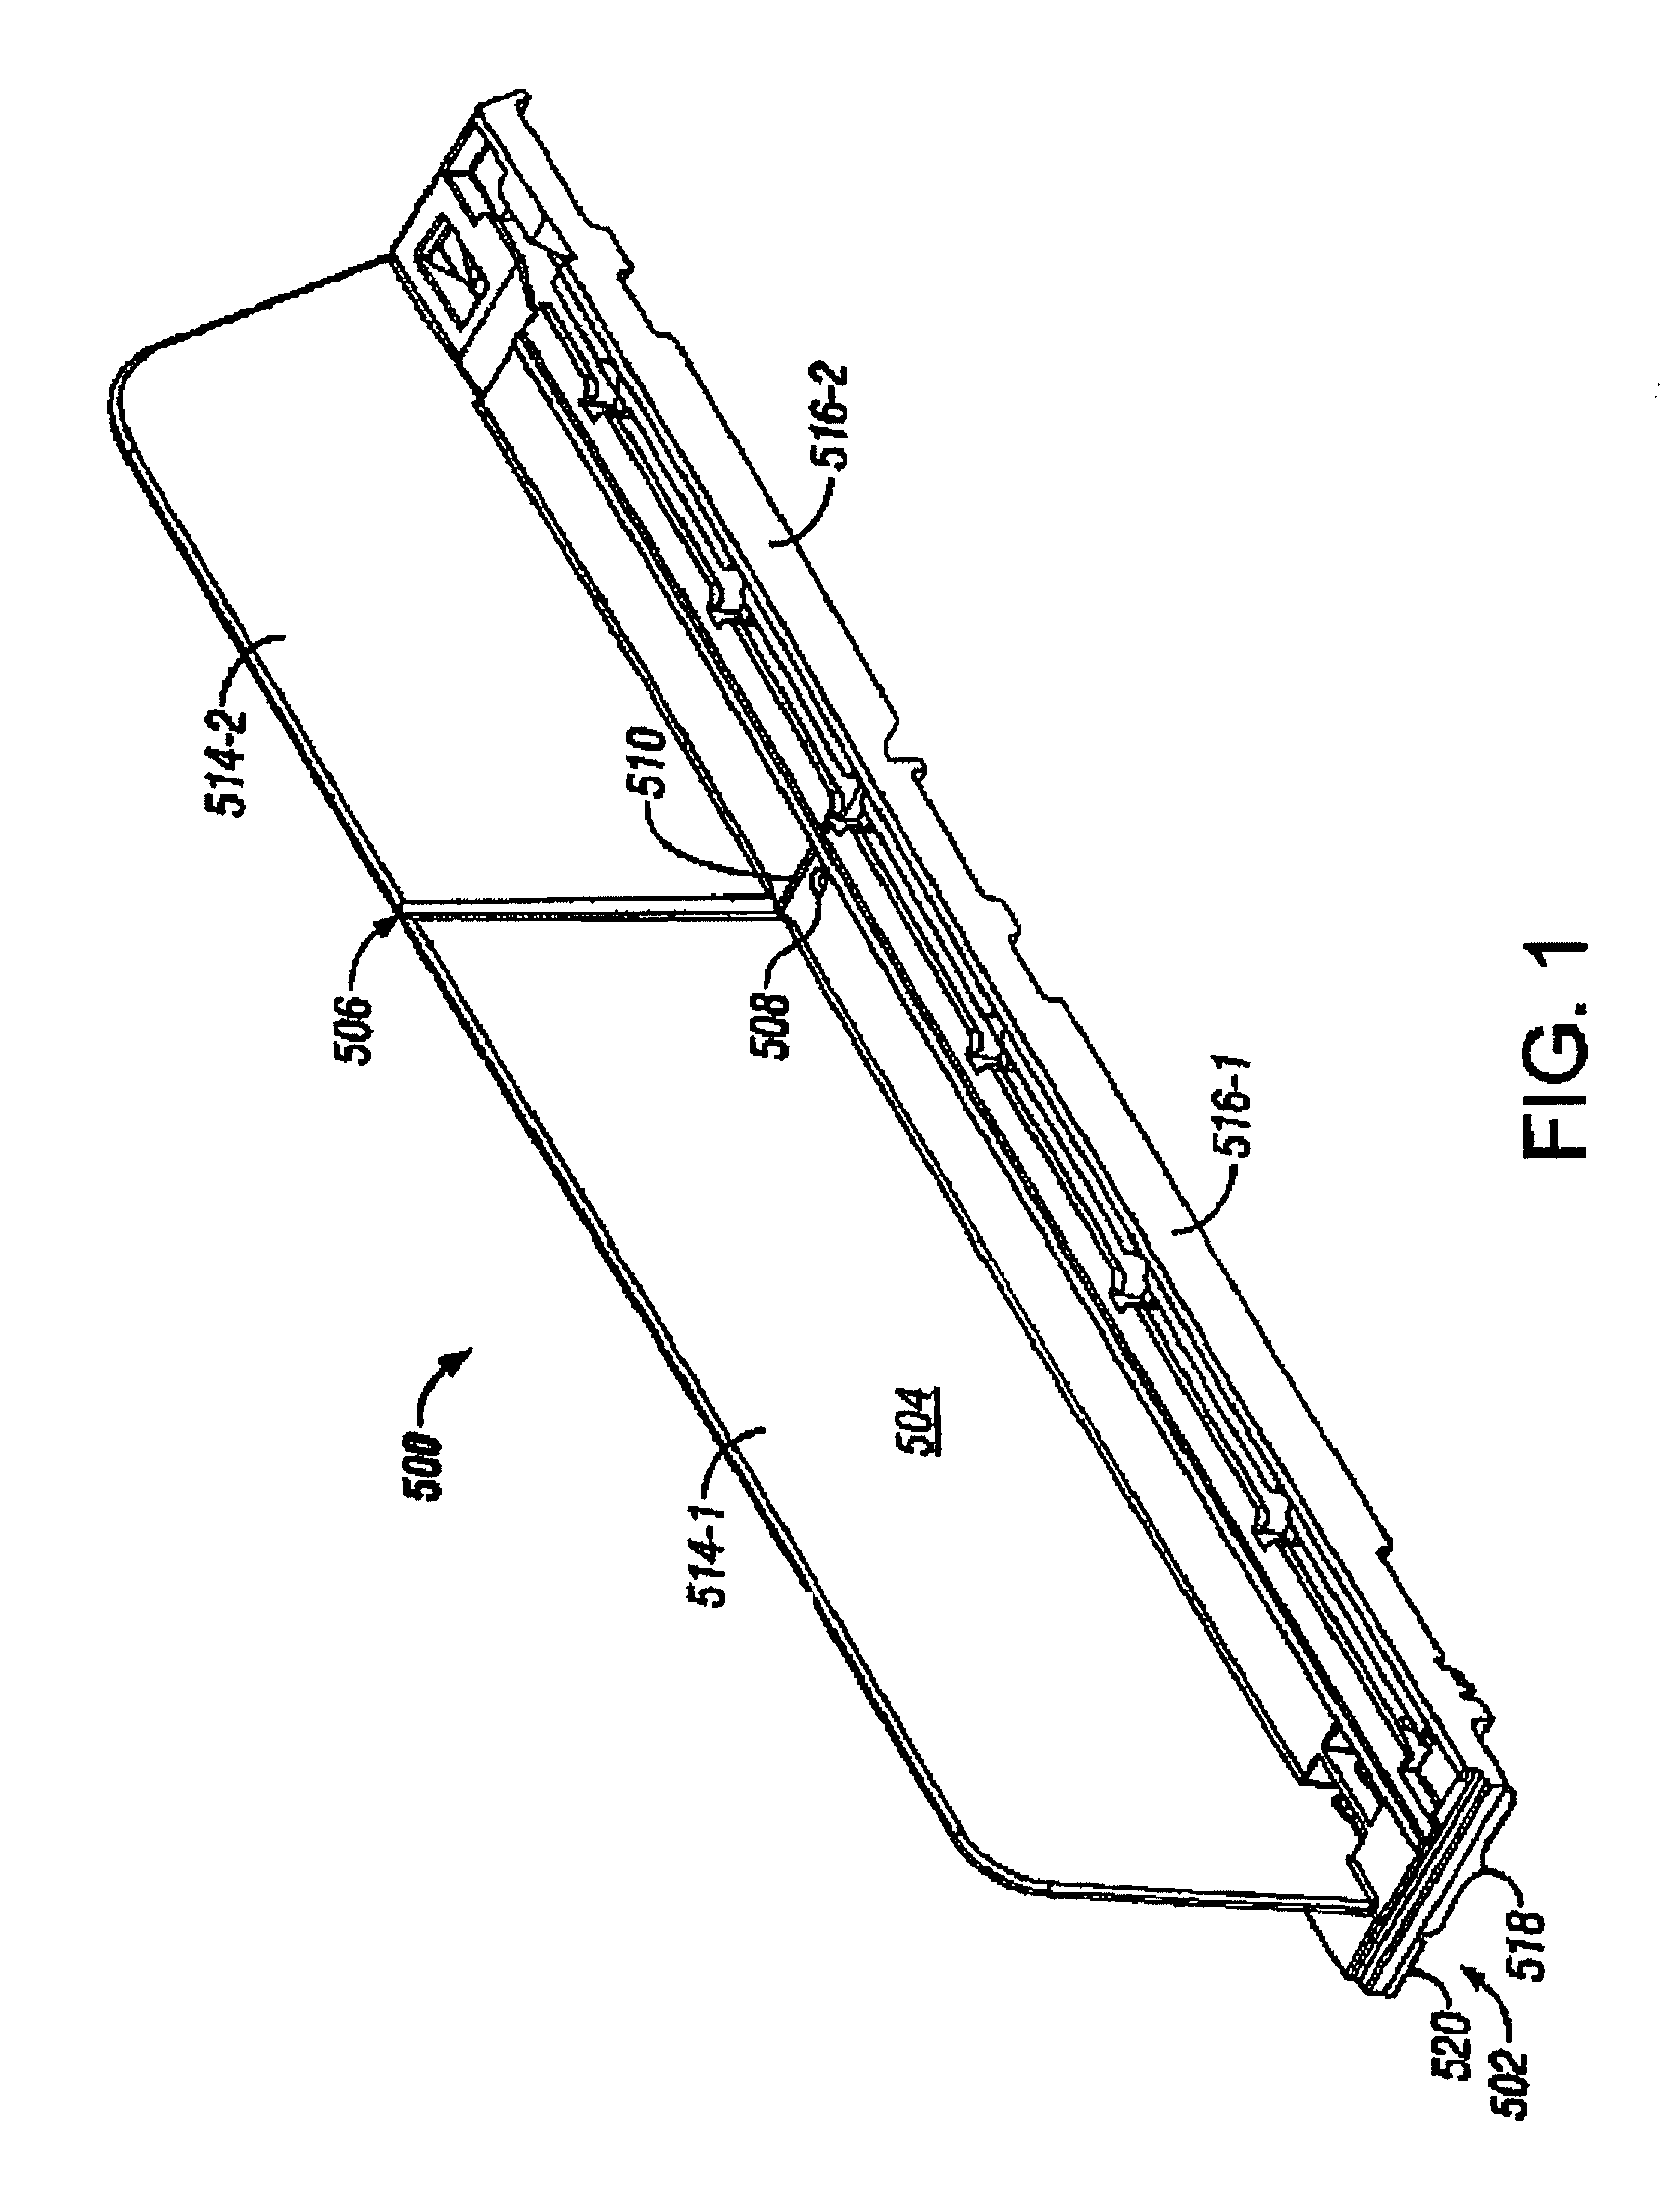 Product management display system with retaining wall